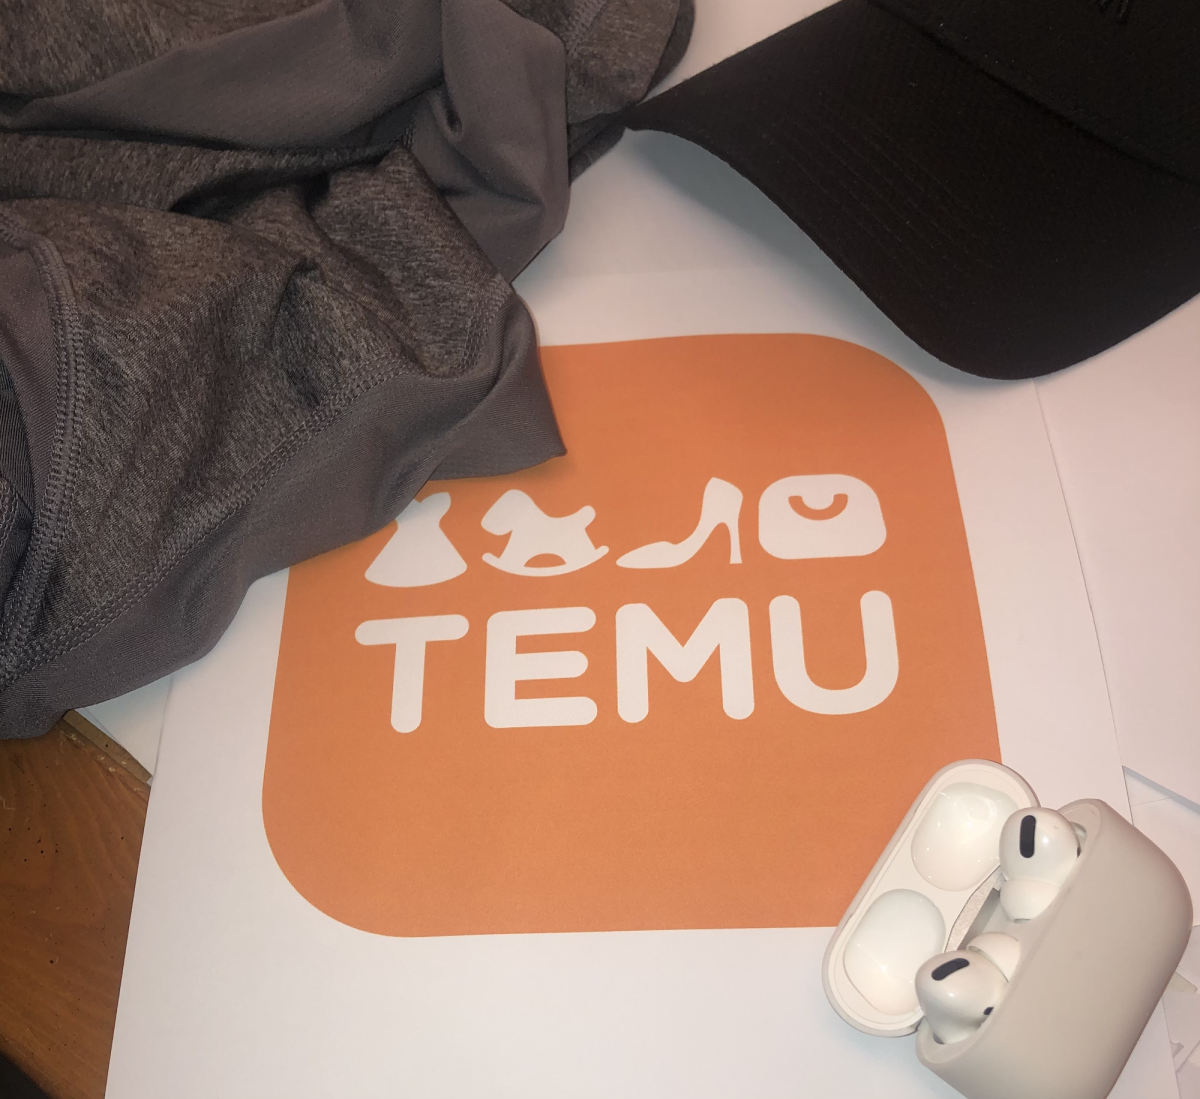 The Temu logo and product examples.